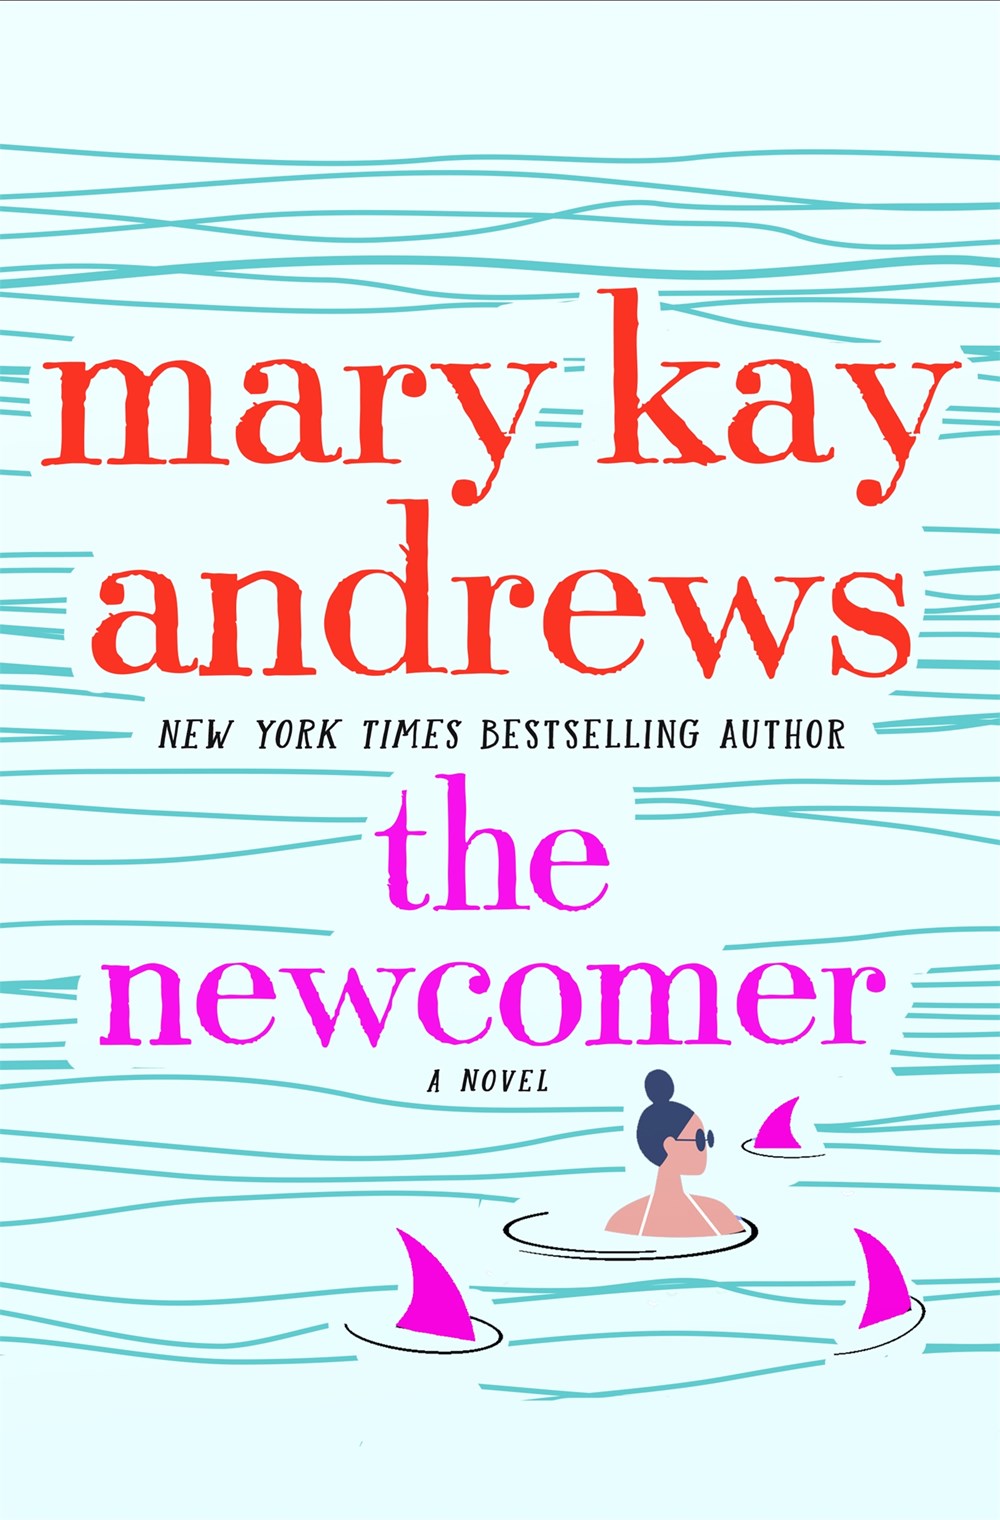 The Newcomer by Mary Kay Andrews